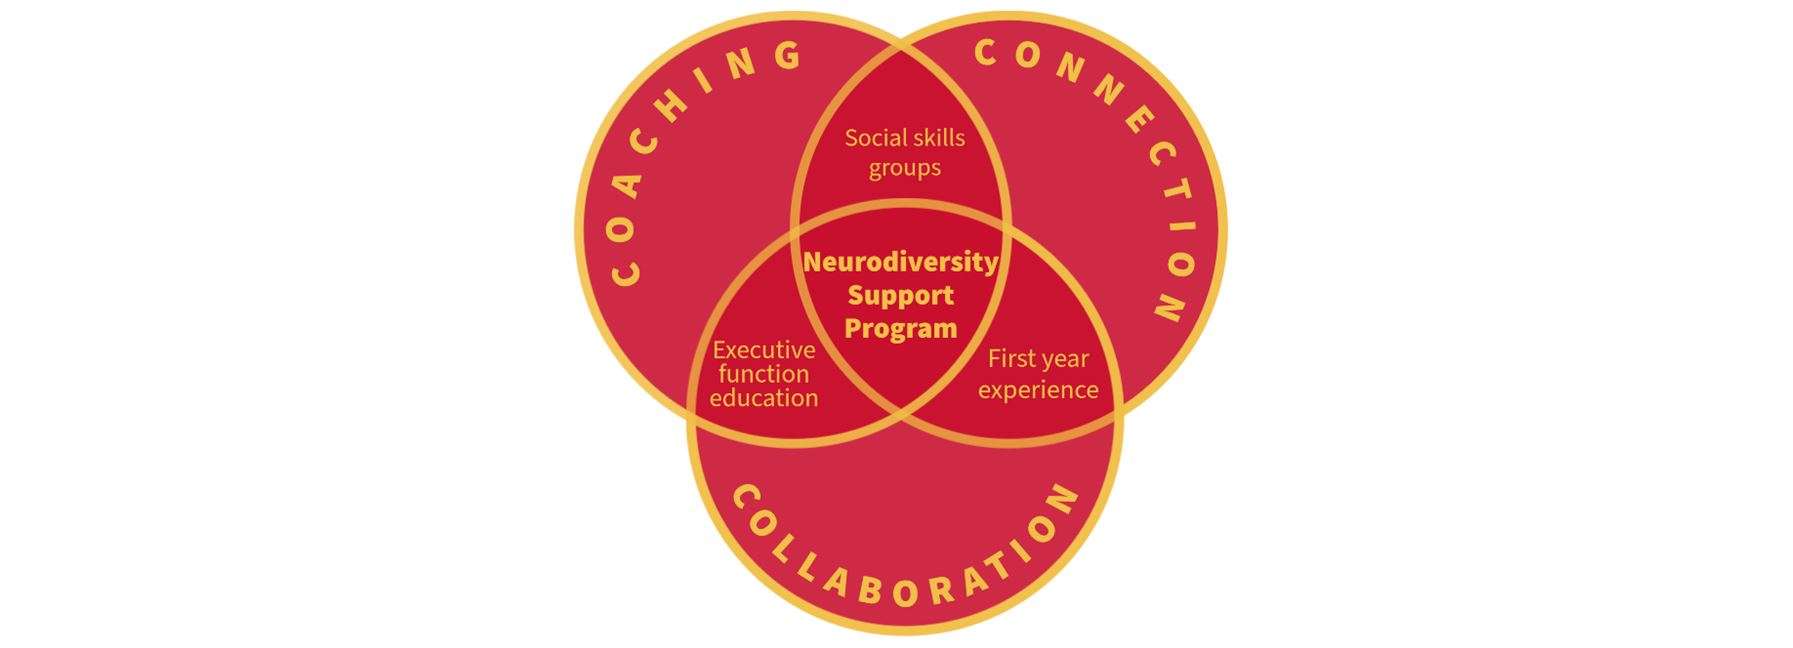 Venn-Diagram with three sections overlapping. Coaching, Collaboration, and connection. The overlapping pieces show social skills group, executive function education, and first year experience. All of these land under the Neurodiversity support program